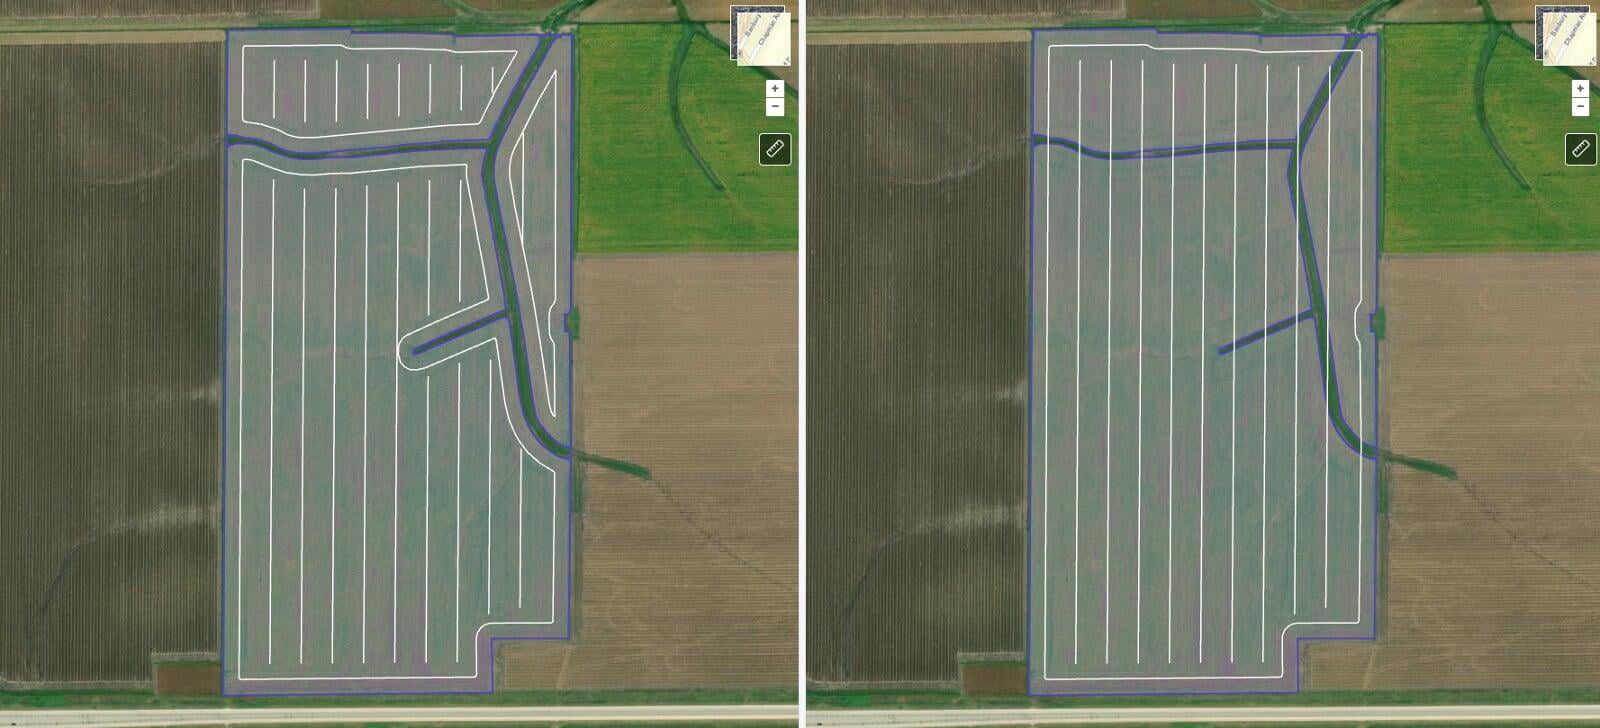 Farm sprayer path plan comparing a 120 foot path plan outlining passable grass waterways versus traversal with section control shut off